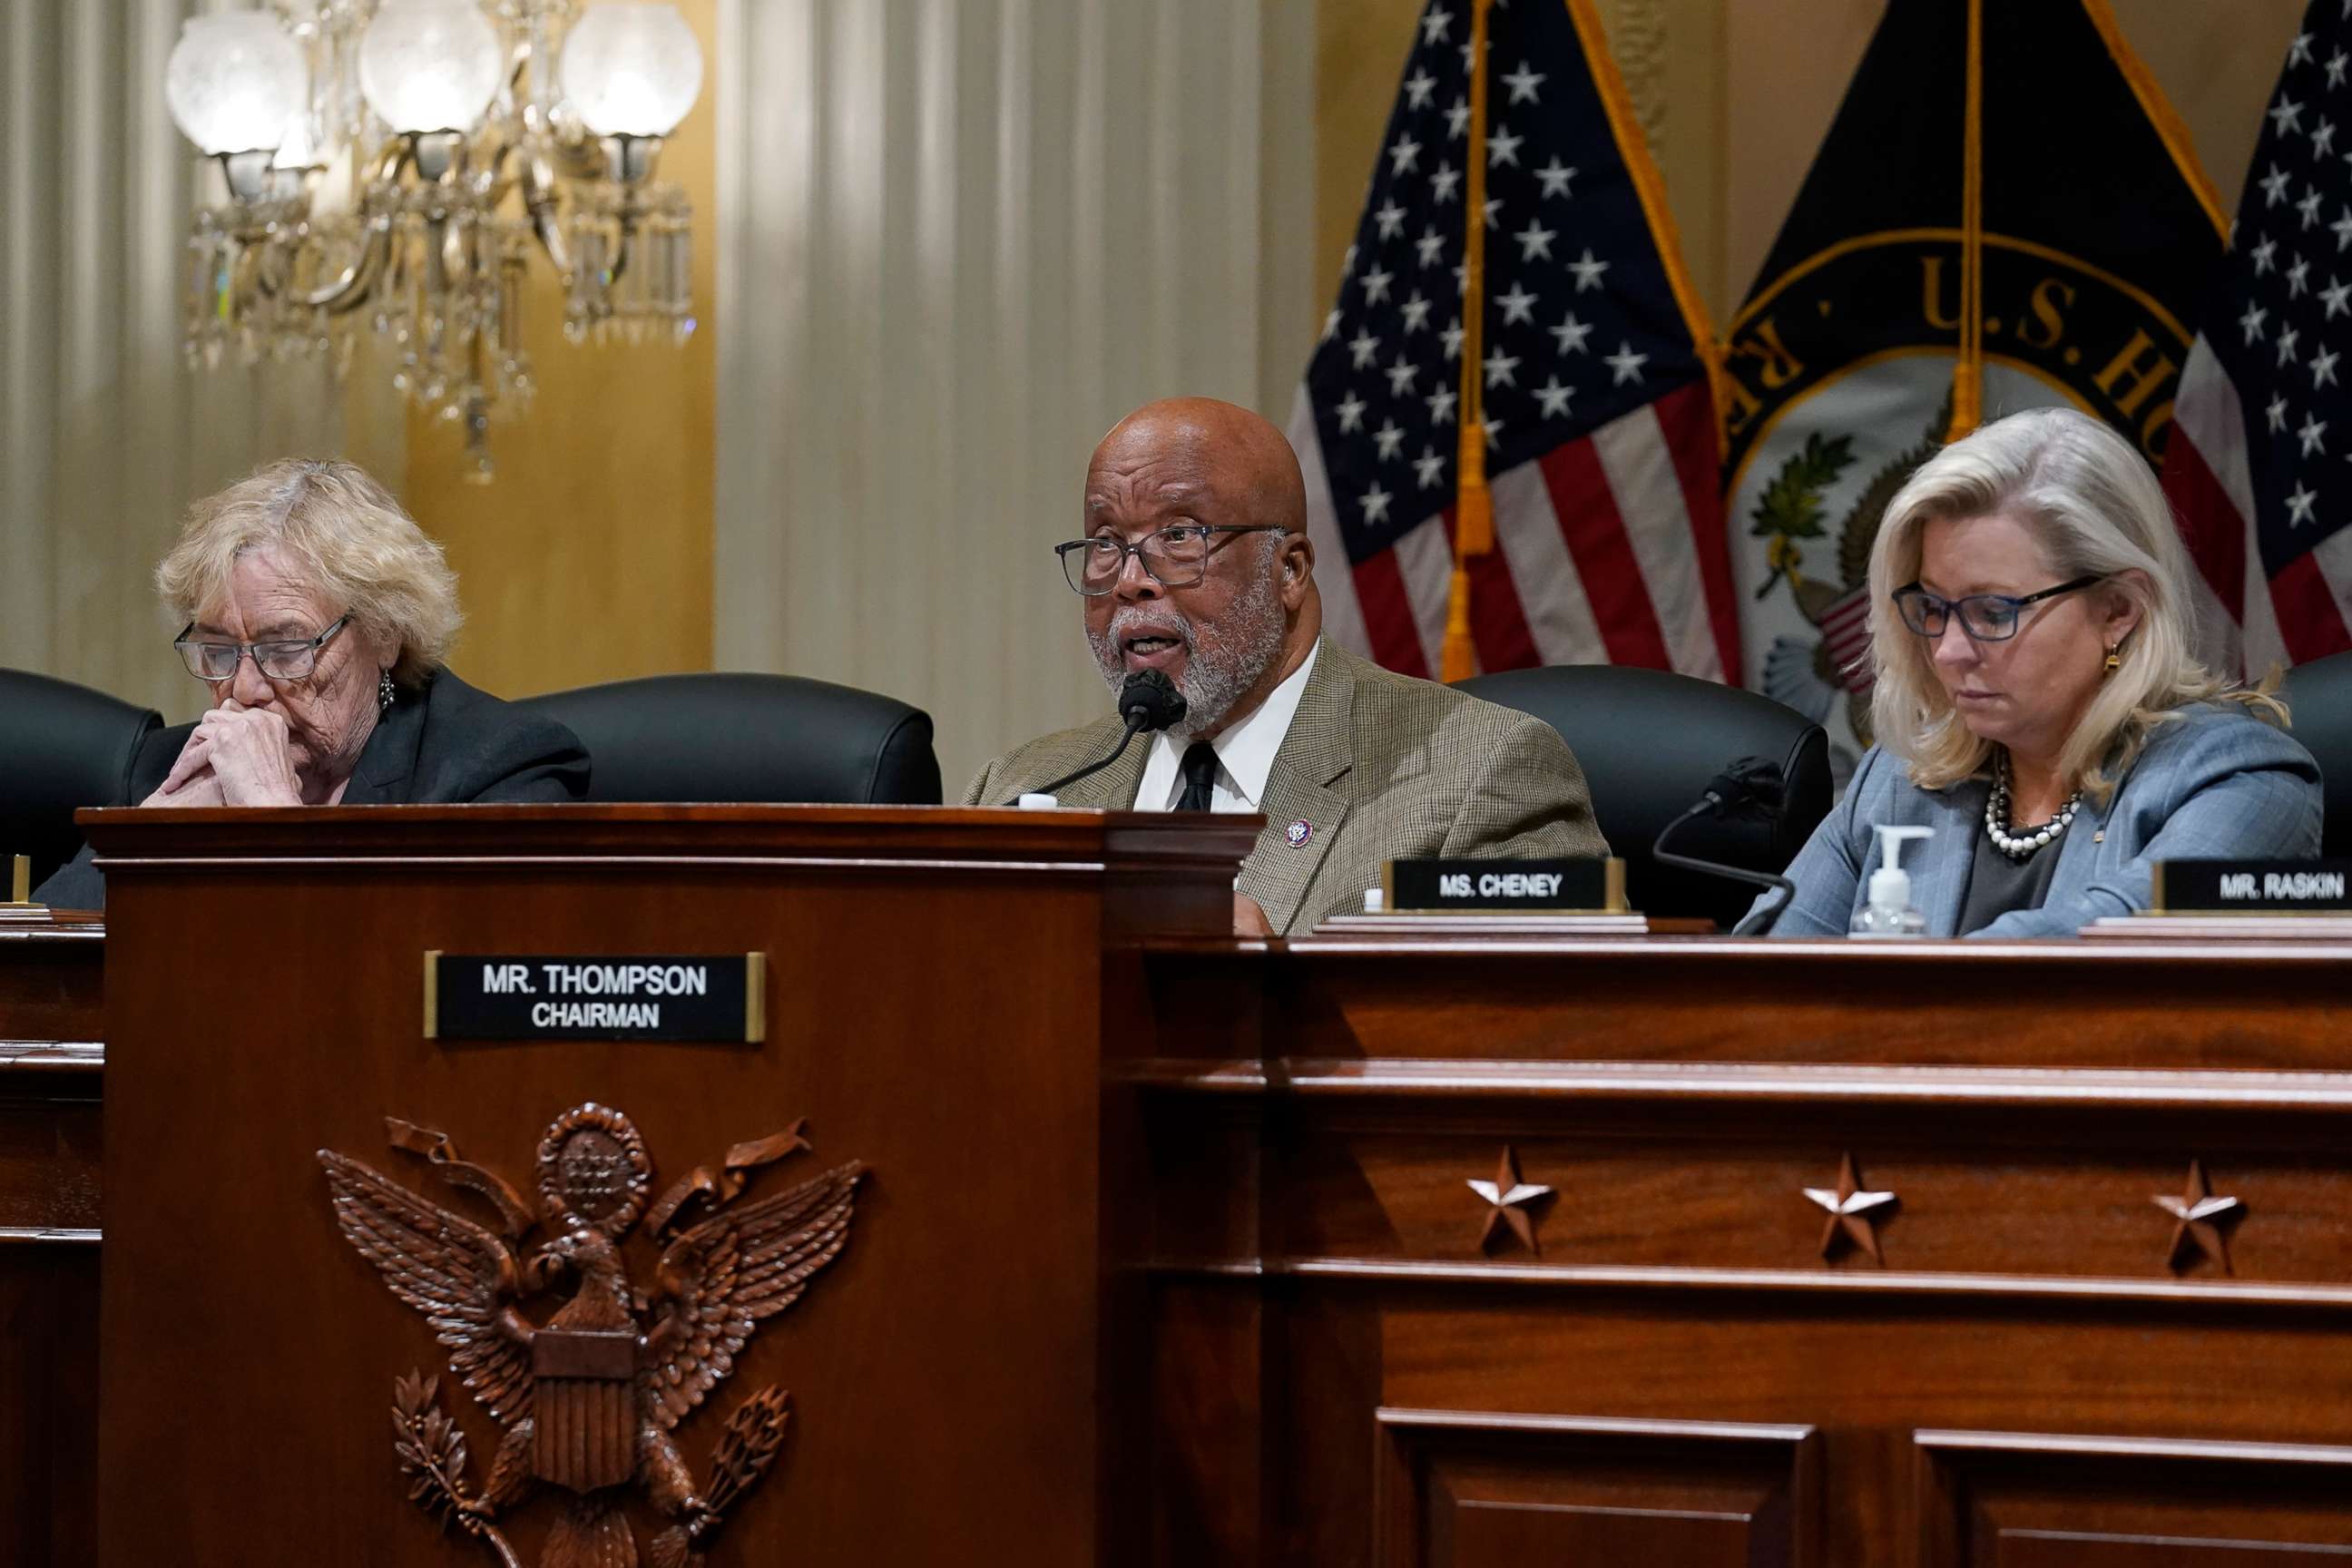 PHOTO: Chairman Bennie Thompson, center, flanked by Rep. Zoe Lofgren, left, and Vice Chair Liz Cheney, makes a statement as the House committee investigating the Jan. 6 attack on the U.S. Capitol convenes in Washington, March 28, 2022.